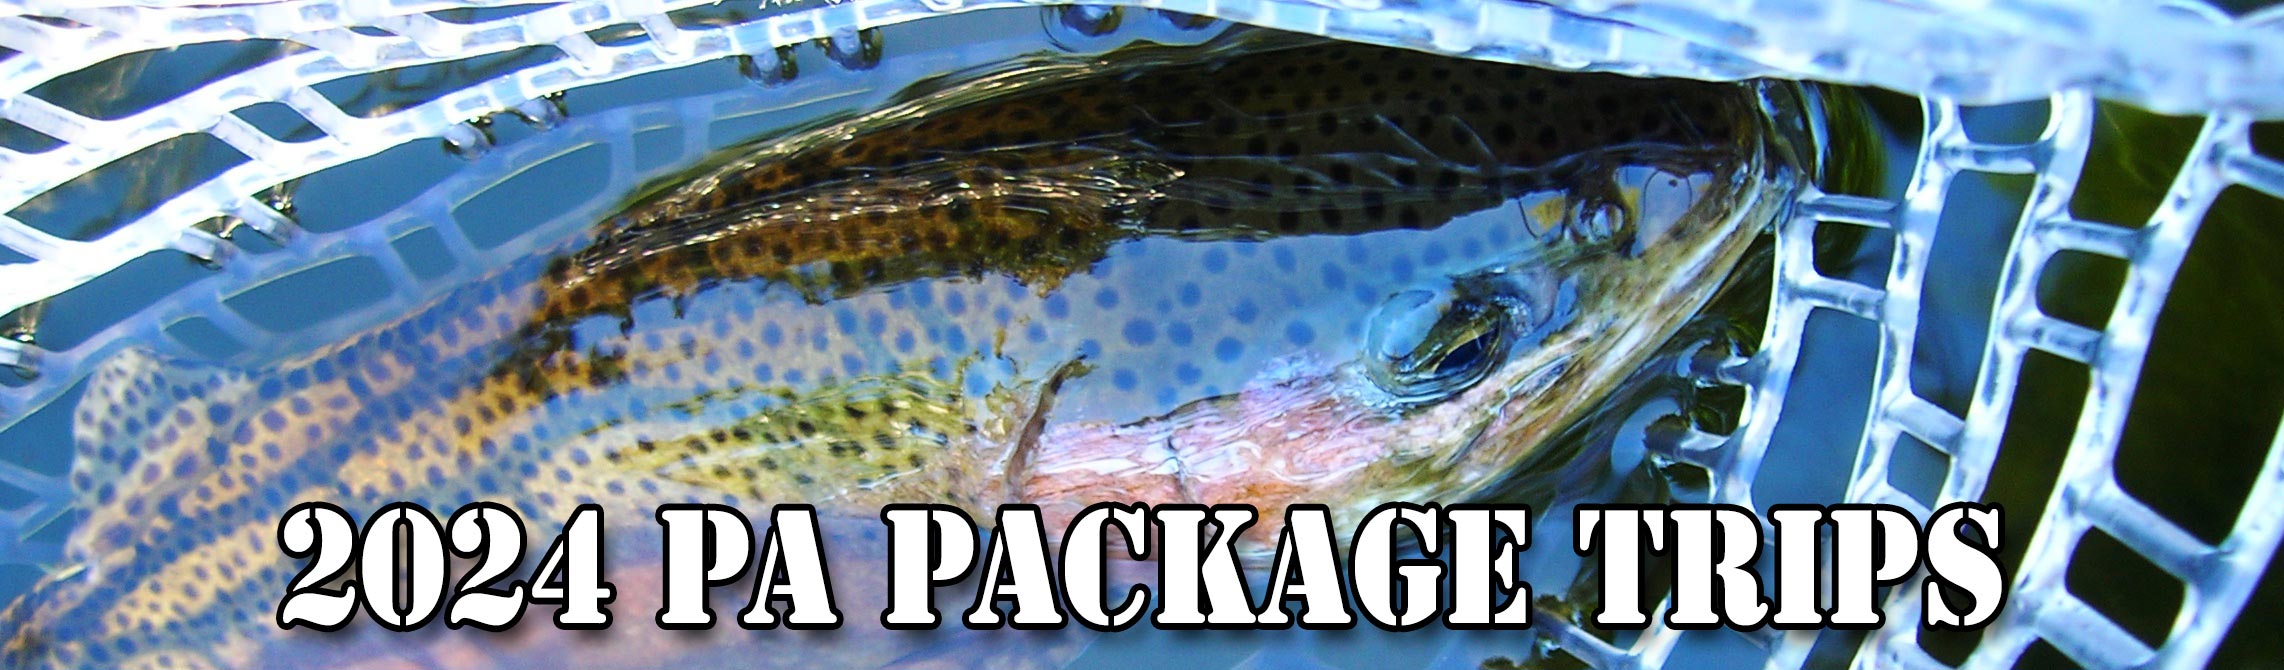 Hendricksons, Grannoms, Caddis, Cahills, March Browns, Sulphurs, And Green Drakes,. We Have One, Two And Three Night Package Trips On Penns, Little Juniata, Spring, Kettle, Pine, Little Pine Creeks.